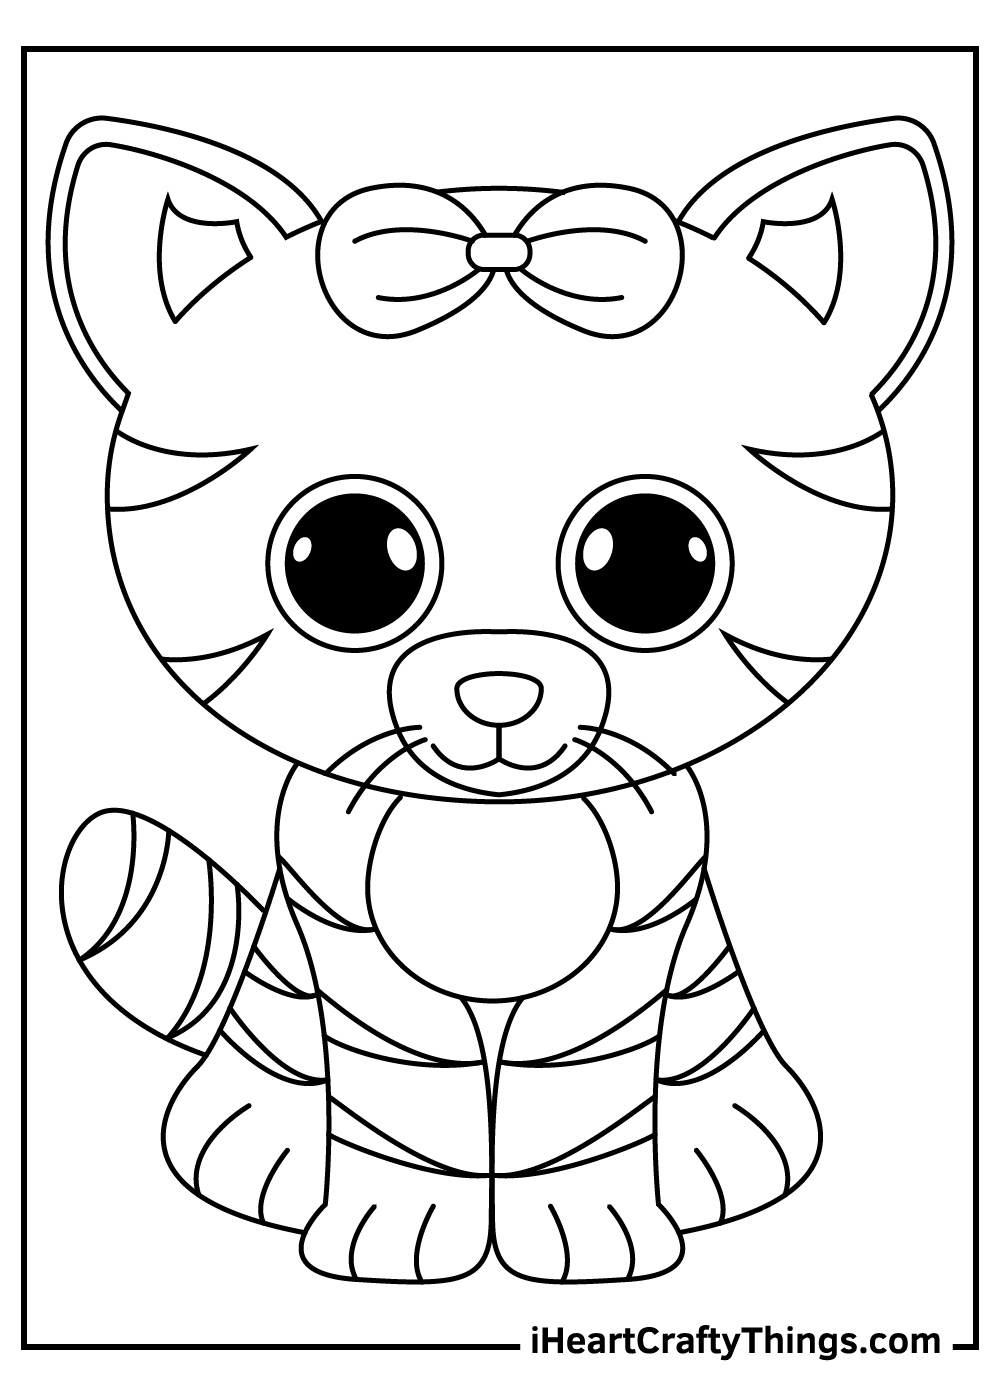 Beanie Boos Coloring Pages (100% Free Printables) intended for Free Printable Beanie Boo Coloring Pages